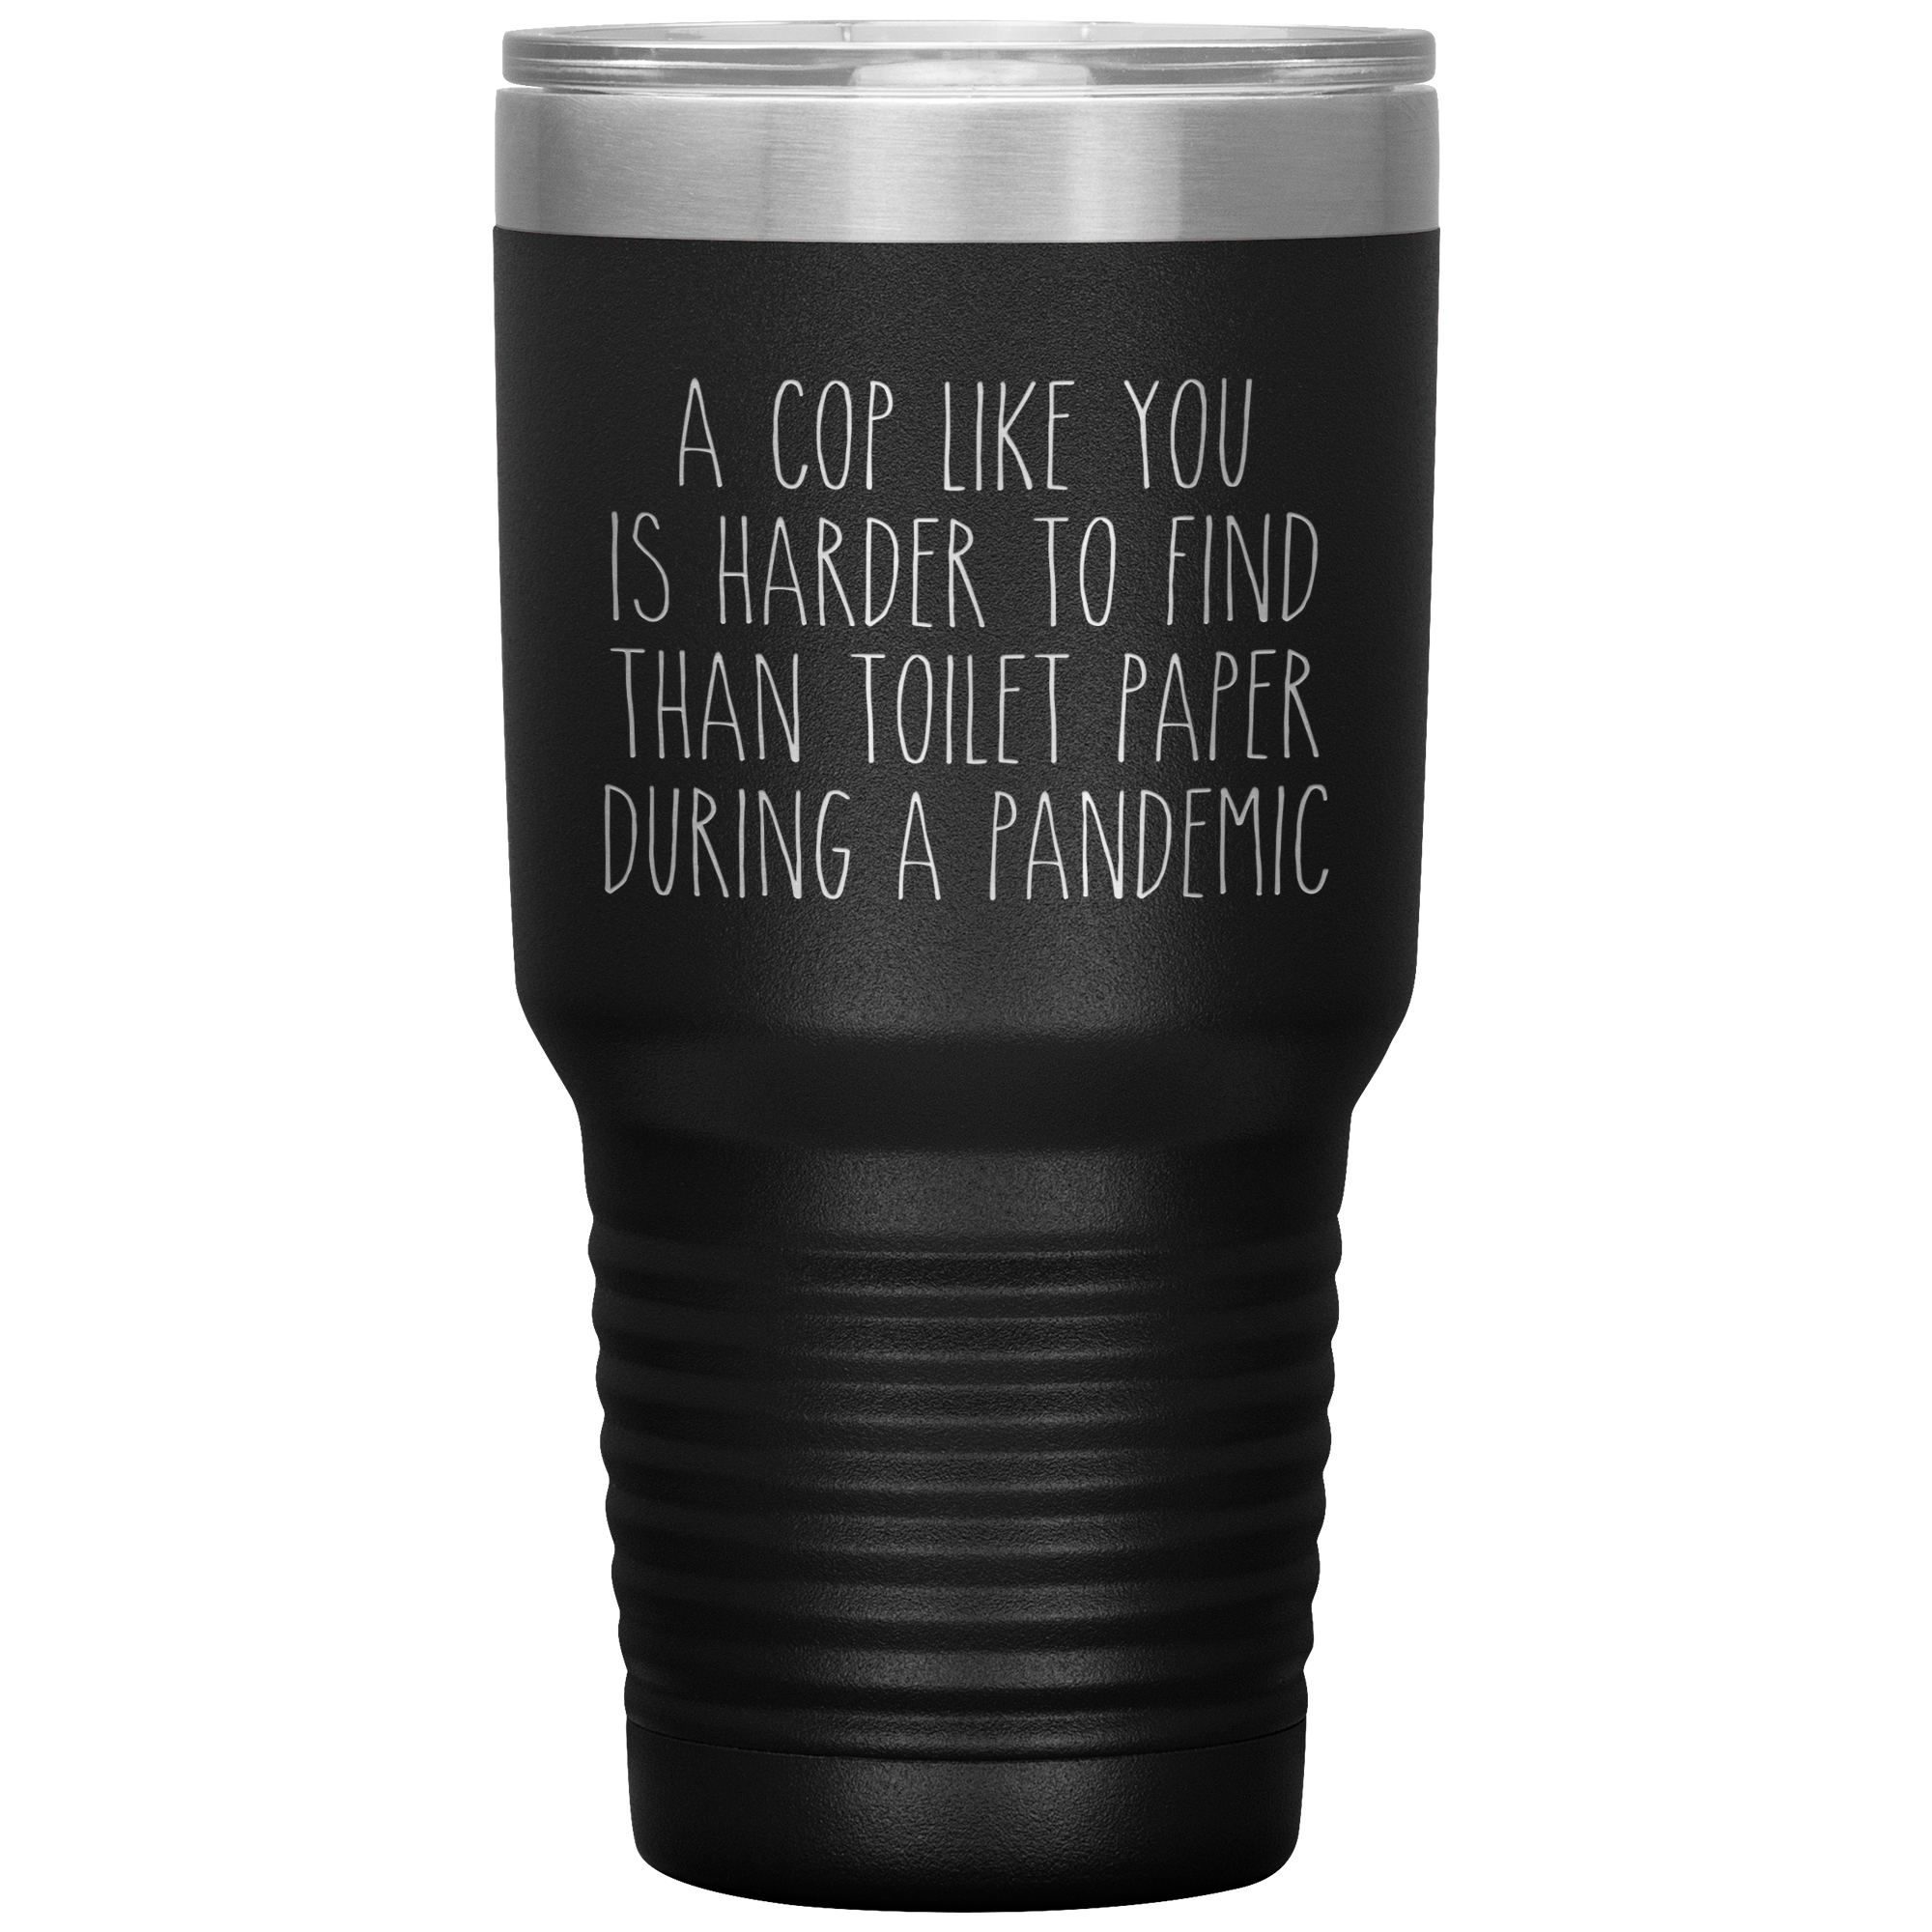 A Cop Like You is Harder to Find Than Toilet Paper During a Pandemic Tumbler Mug Travel Coffee Cup 30oz BPA Free